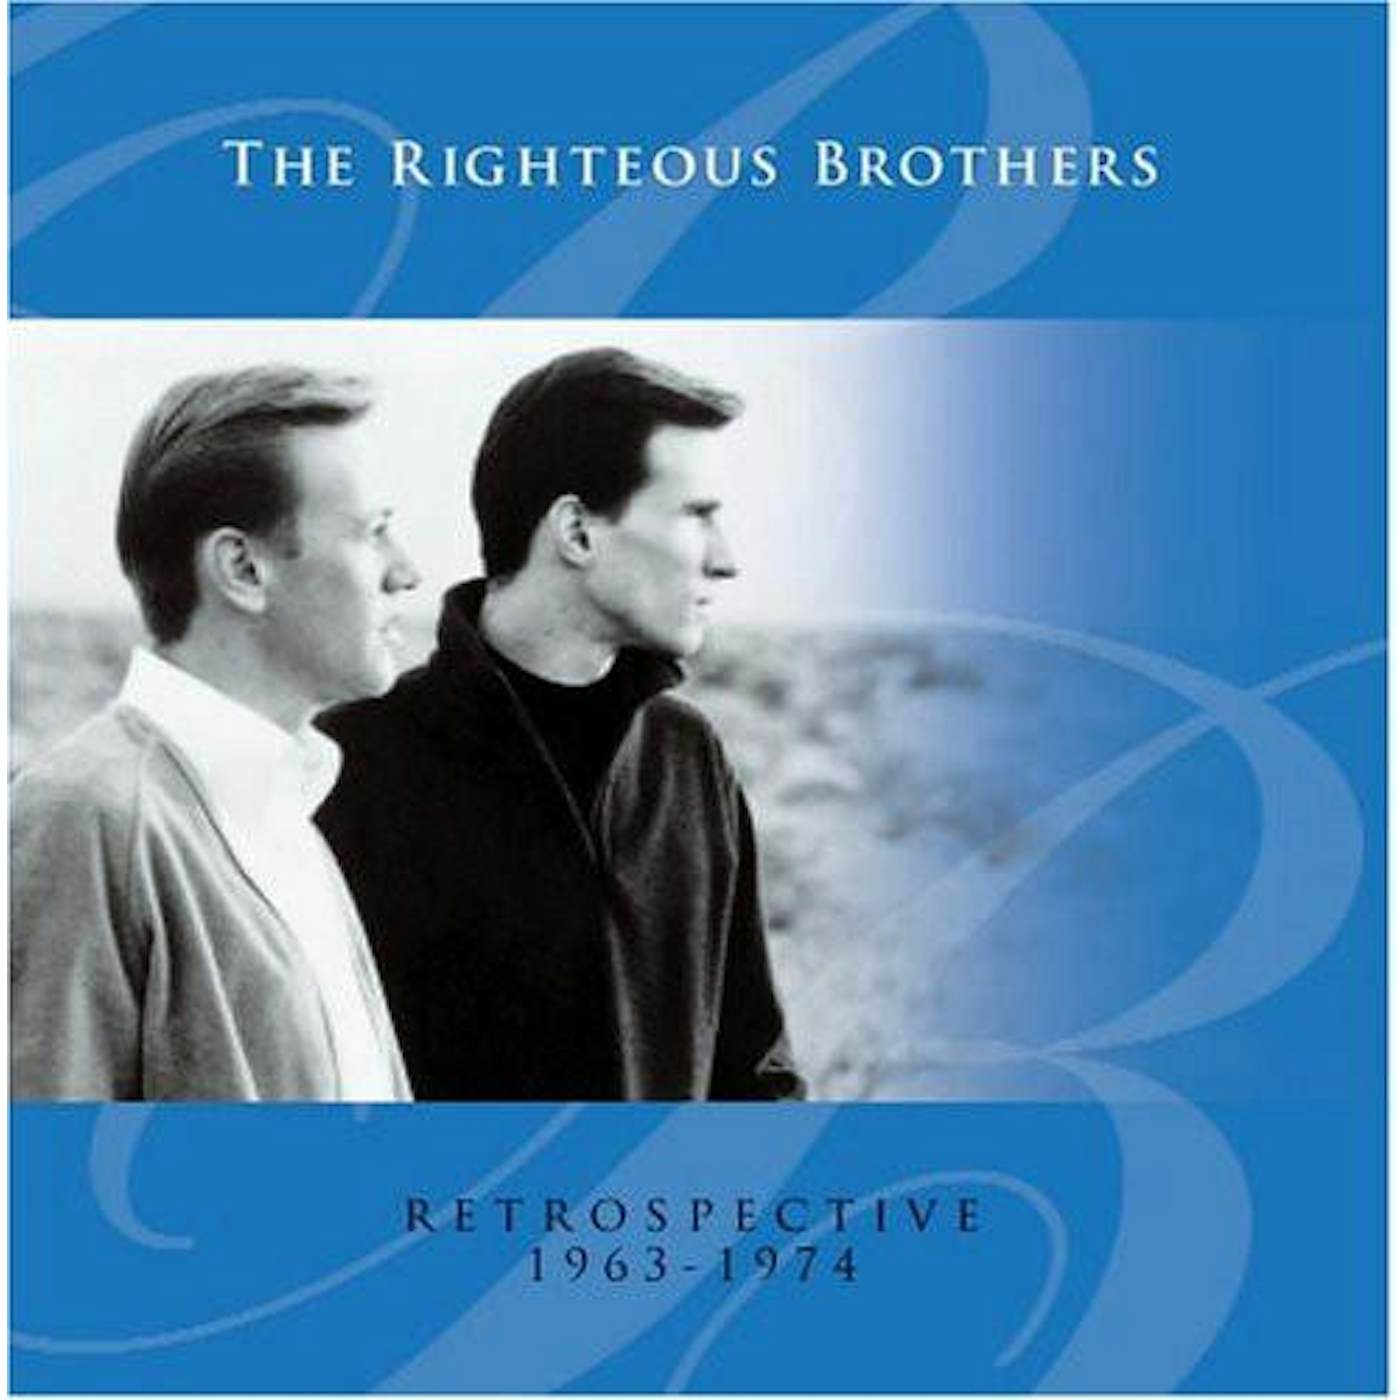 The Righteous Brothers RETROSPECTIVE 1963 -1974 CD